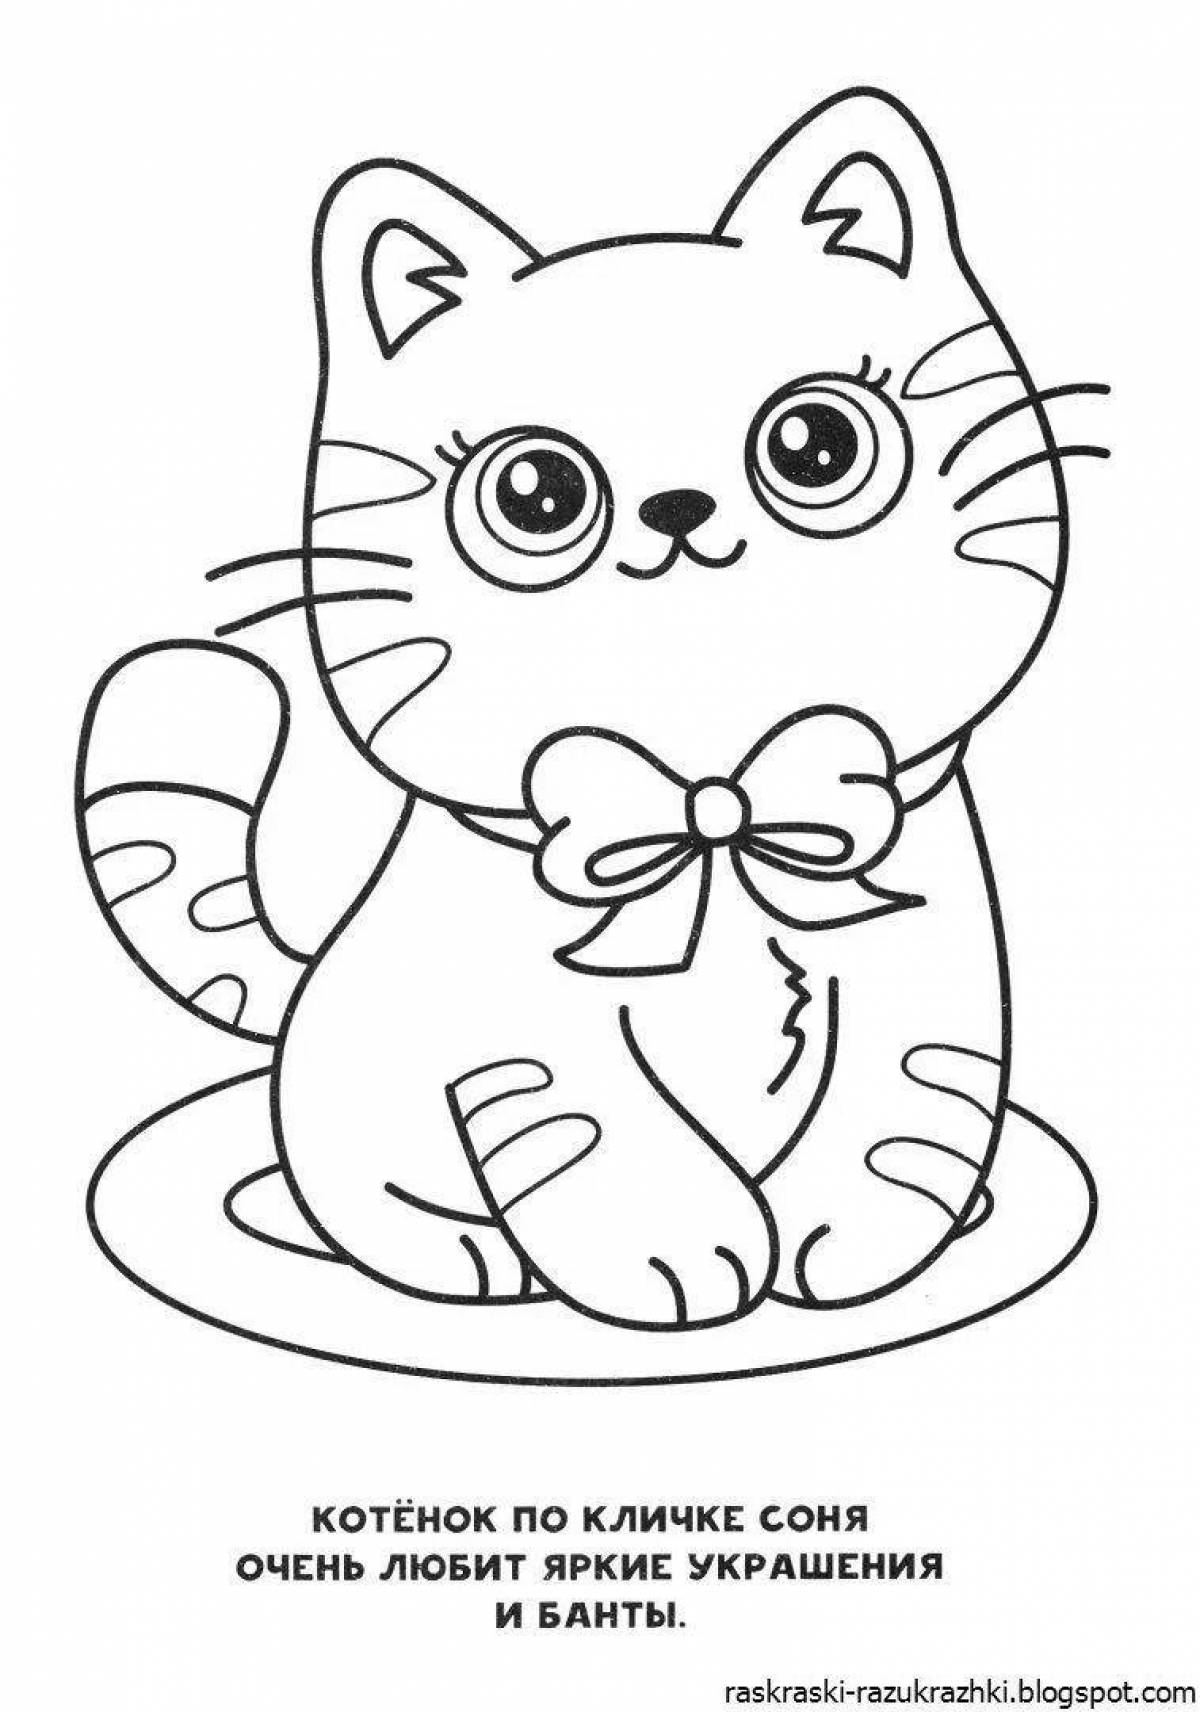 Adorable cat coloring book for 6-7 year olds